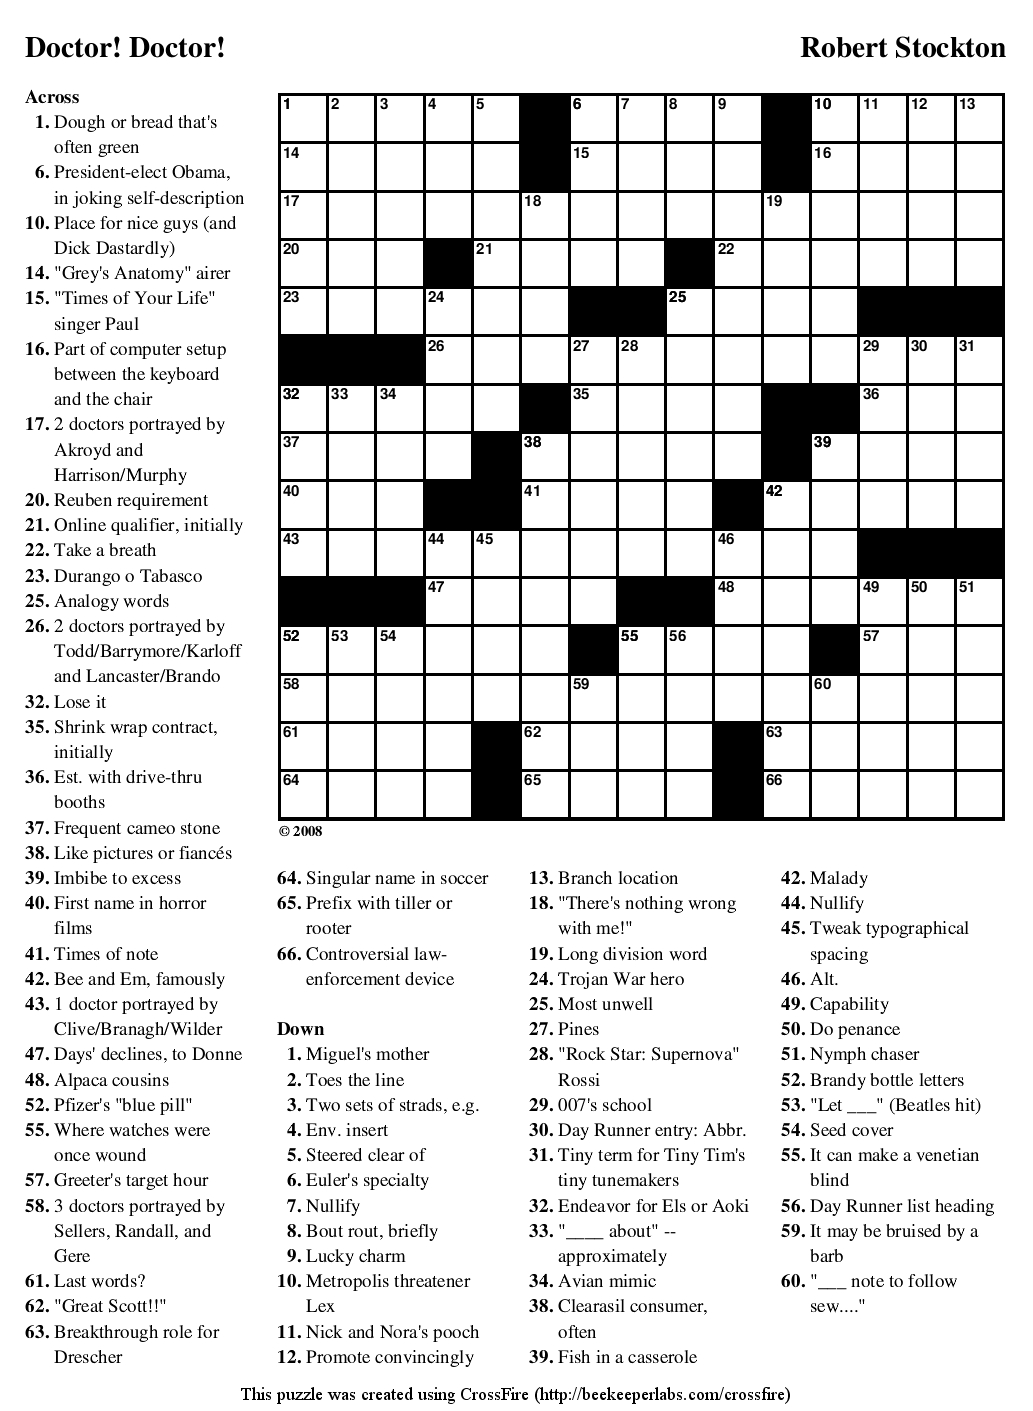 Crossword Puzzles Printable - Yahoo Image Search Results | Crossword - Free Printable Crossword Puzzles For Kids